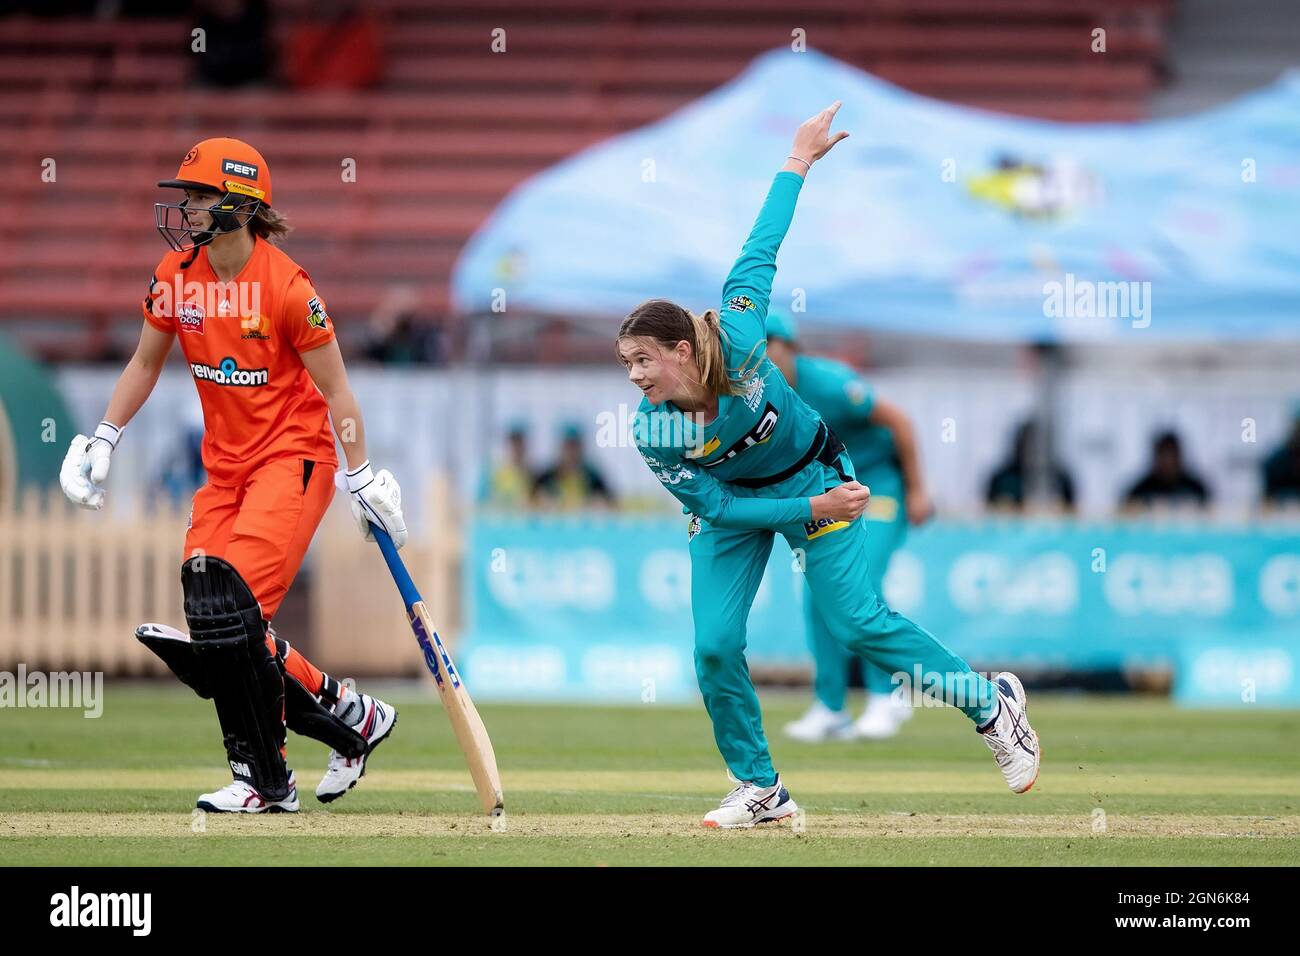 Courtney Sippel of Brisbane Heat bowls during the week 1 Women's Big Bash League cricket match between Perth Scorchers and Brisbane Heat.  Credit: Pete Dovgan/Speed Media/Alamy Live News Stock Photo